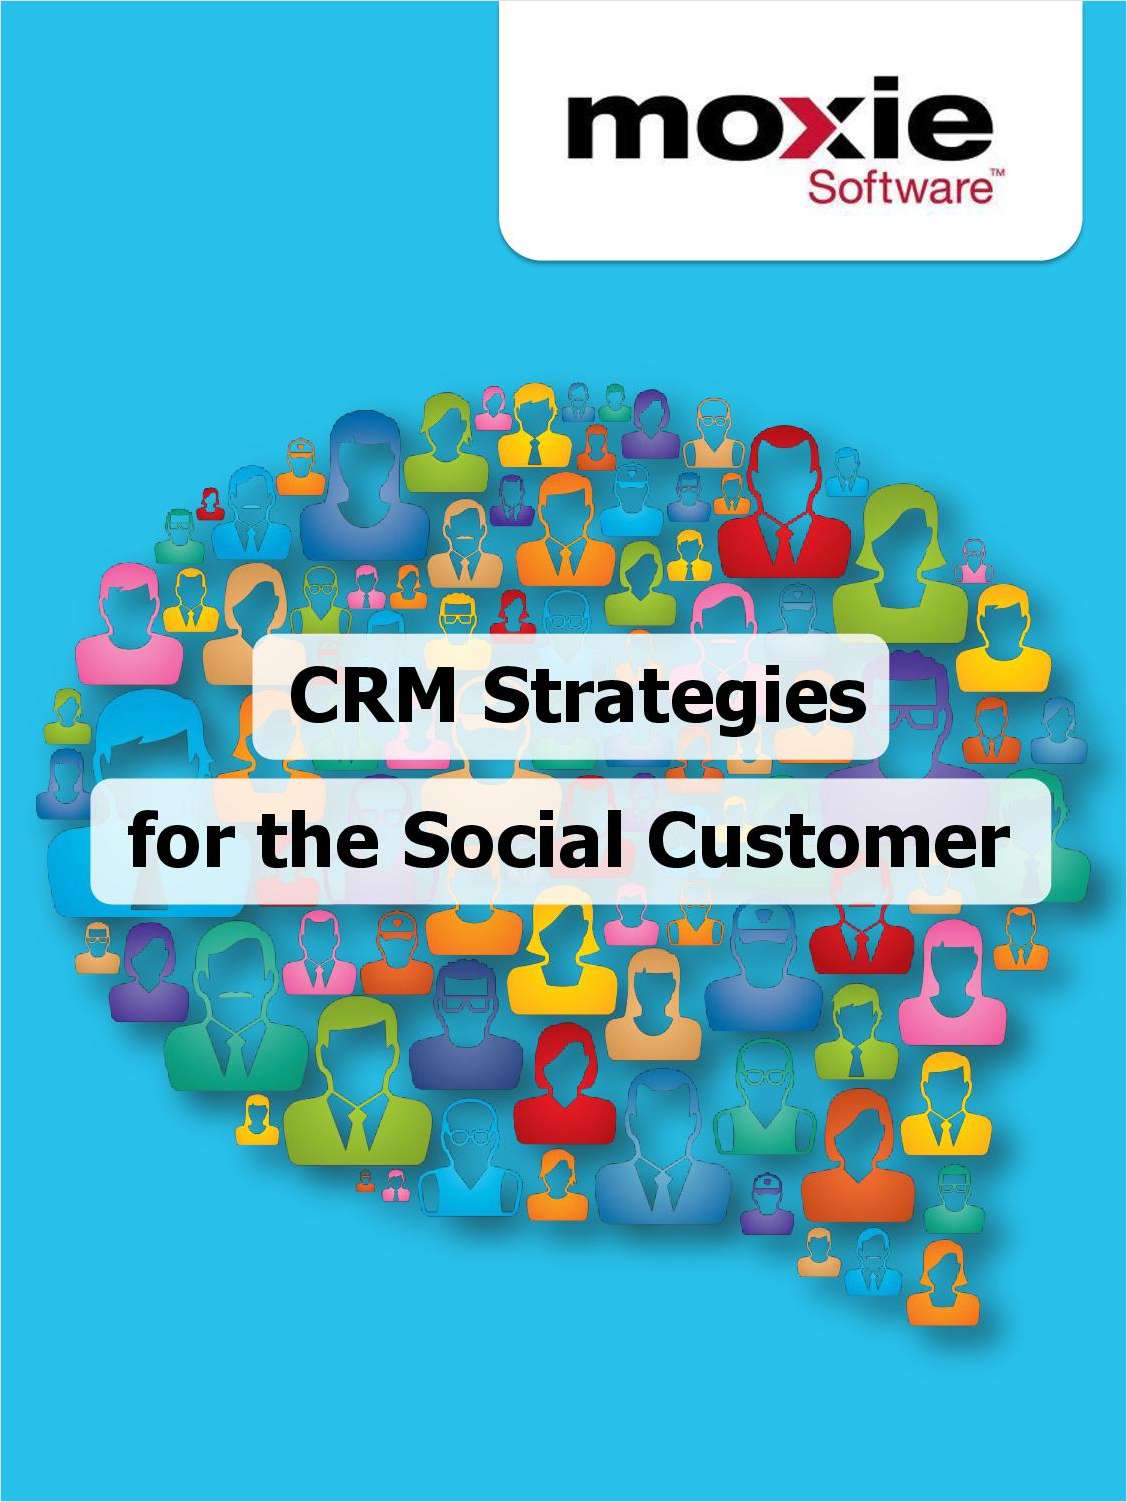 CRM Strategies for the Social Customer